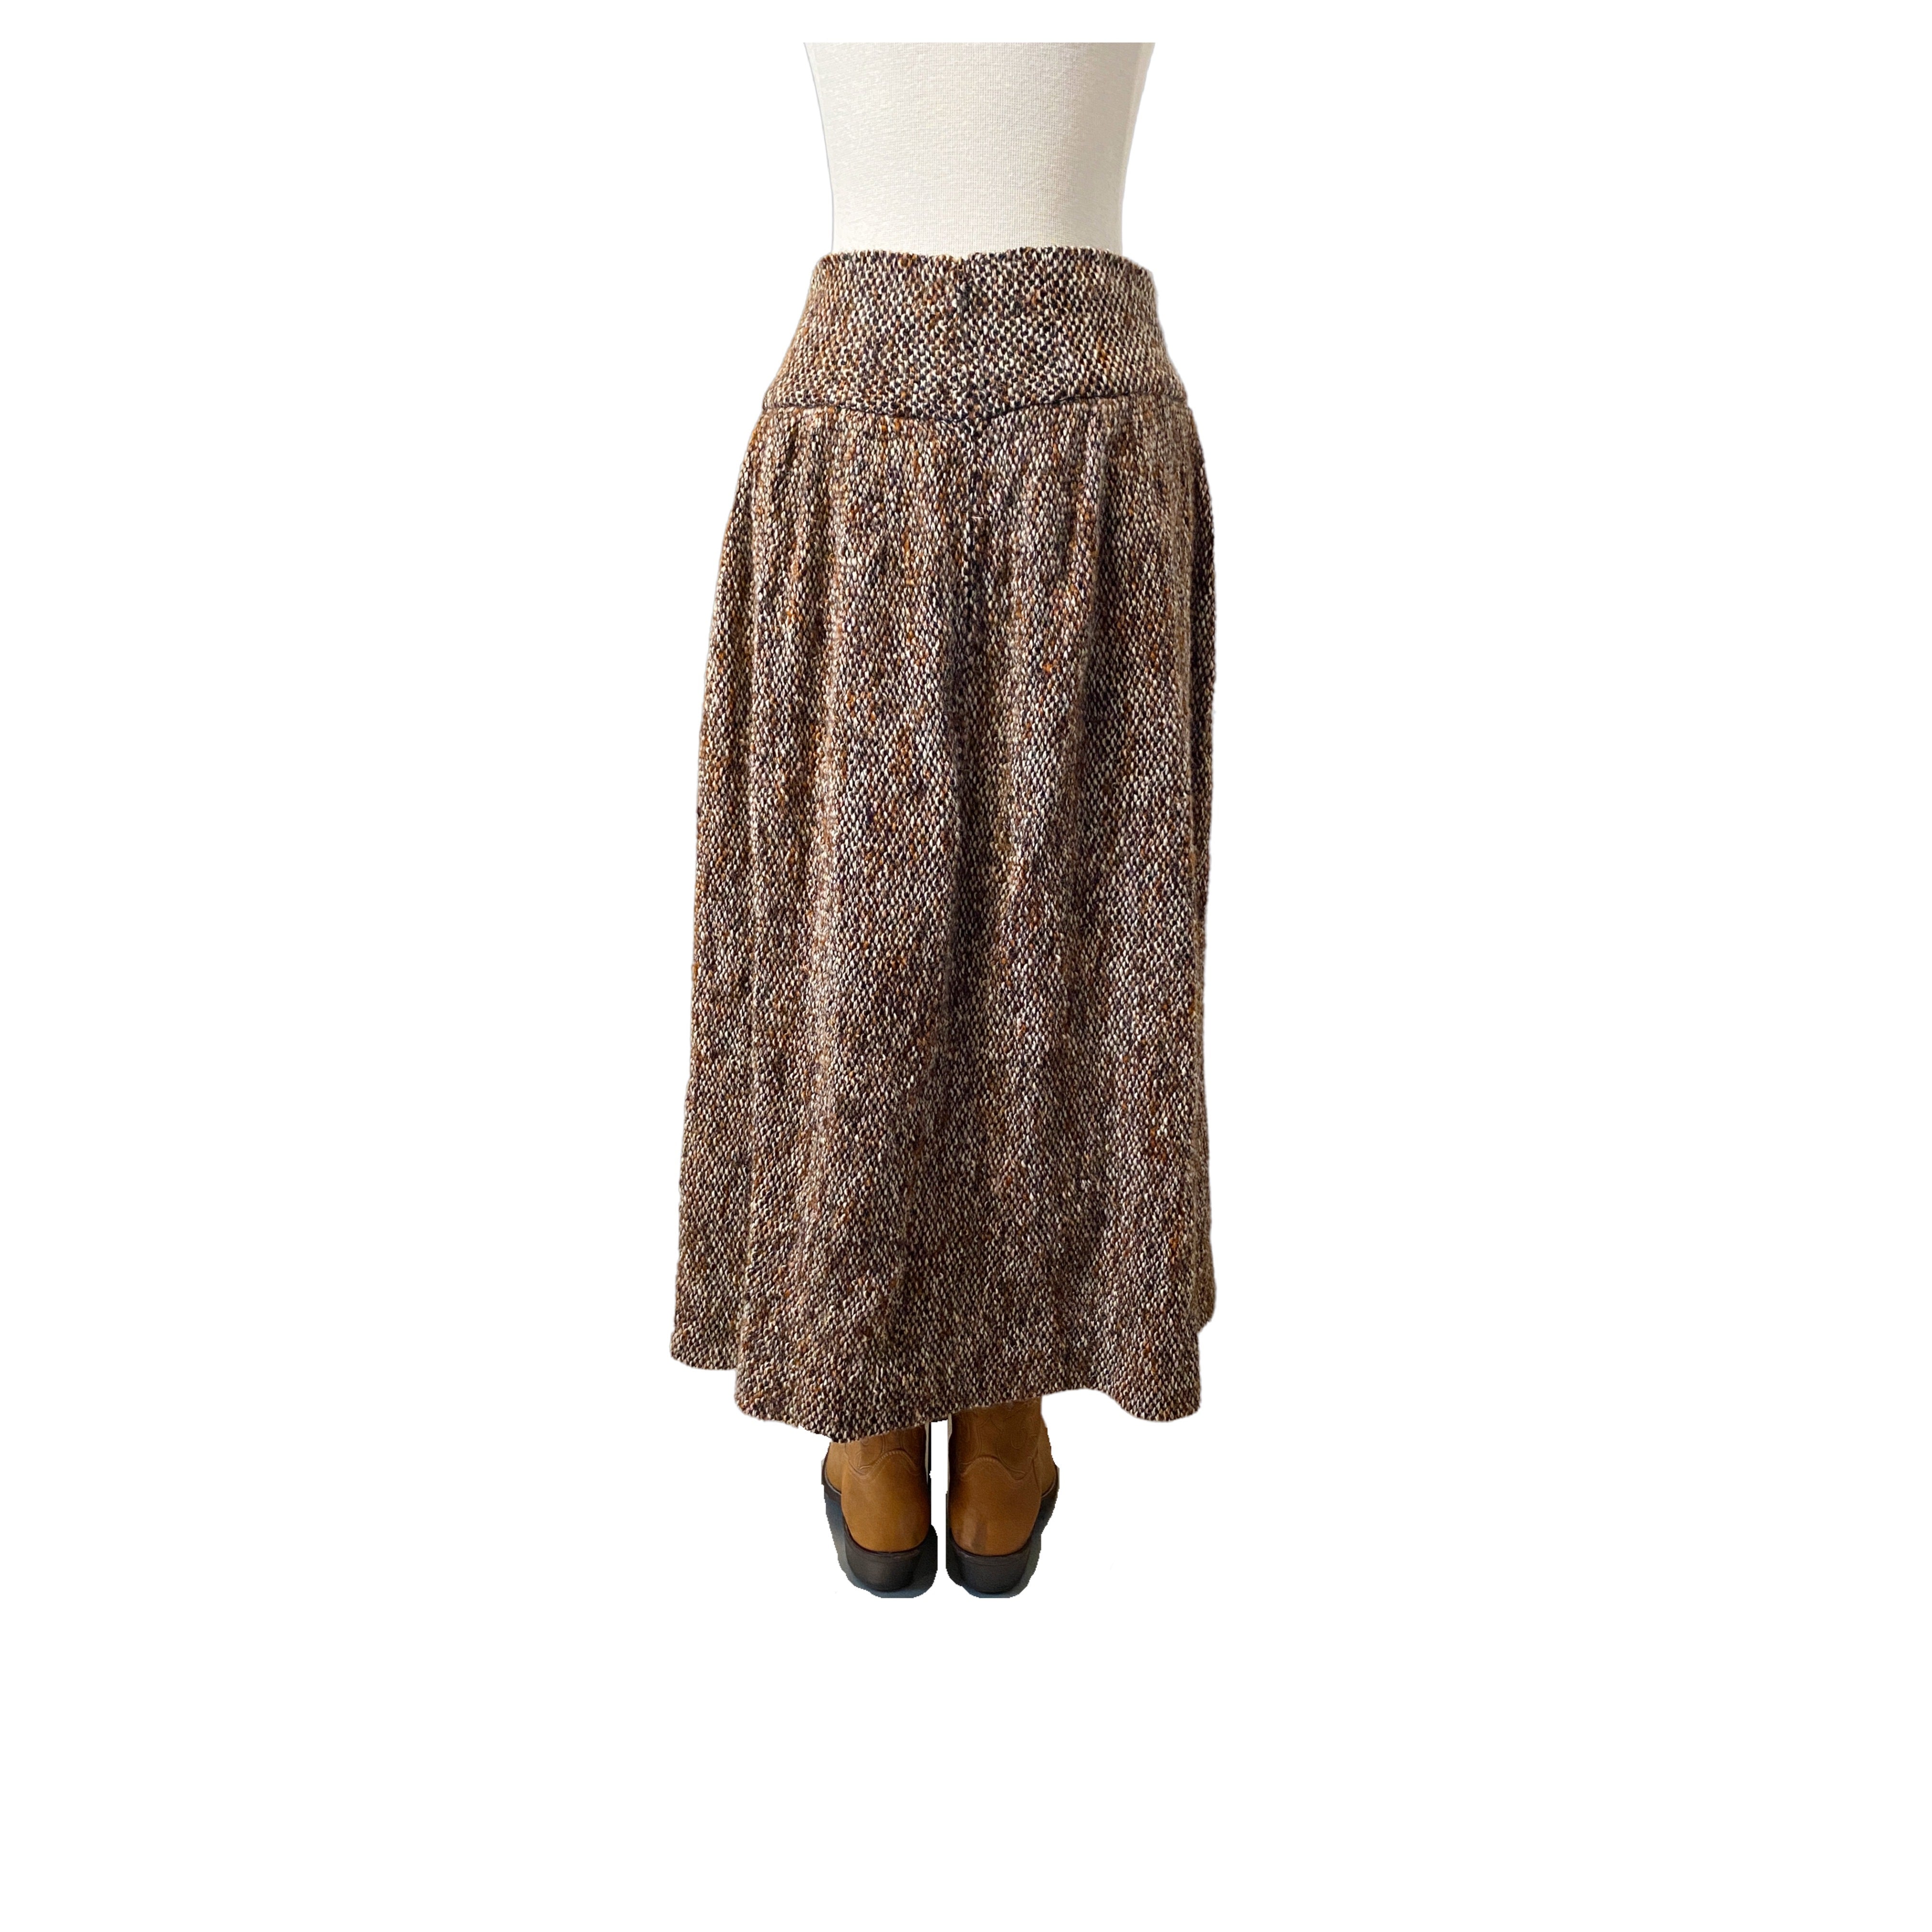 WOOLY MAMOTH TEXTURED SKIRT